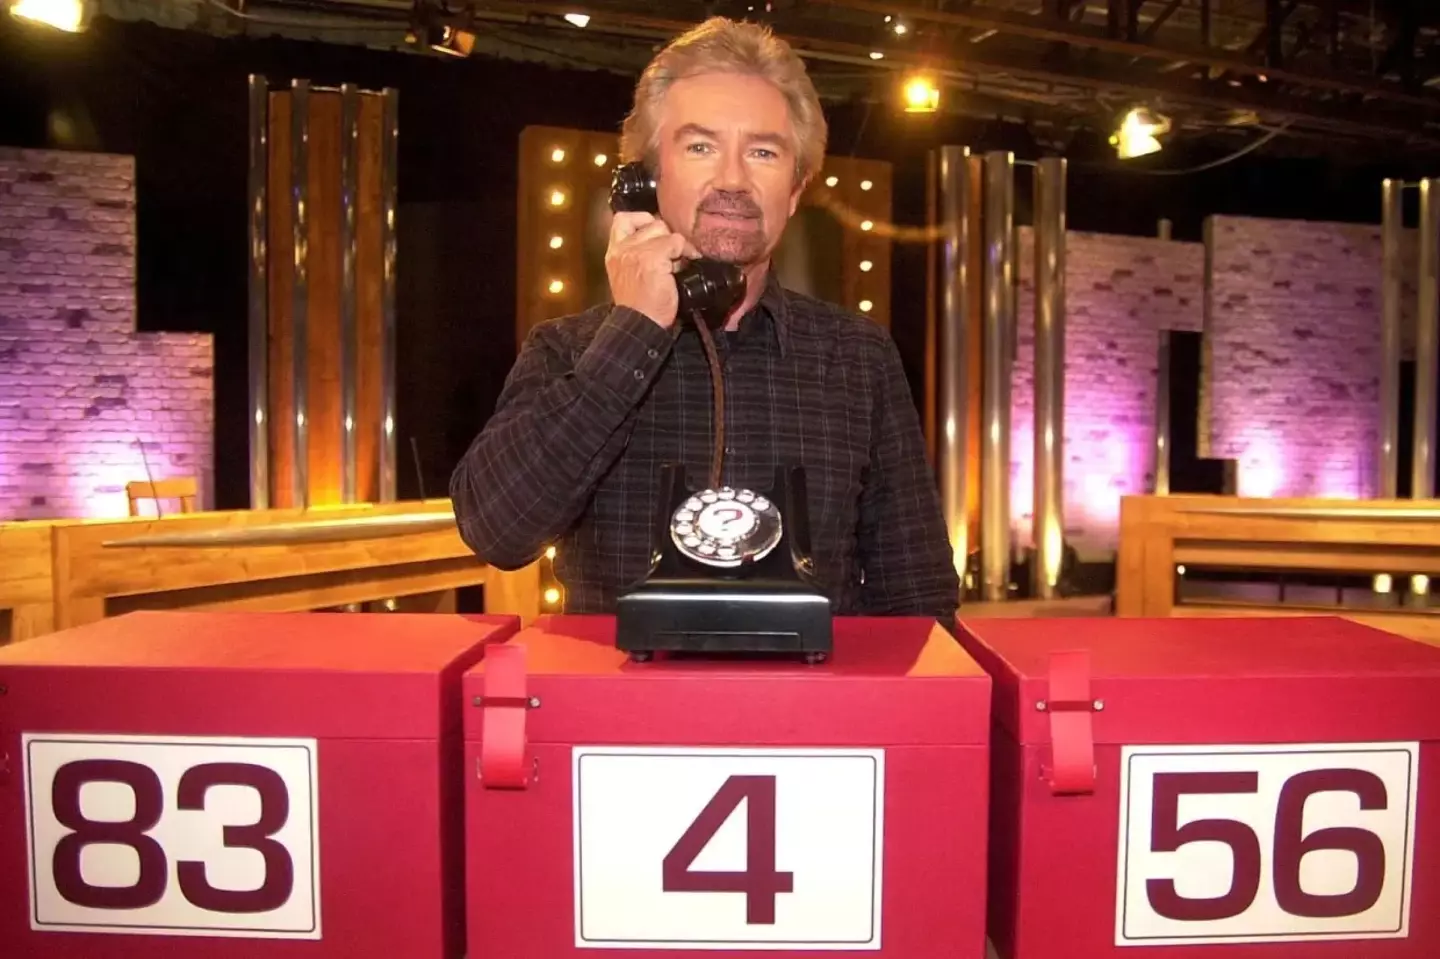 Deal or No Deal is set to return to our screens - but without Noel Edmonds.